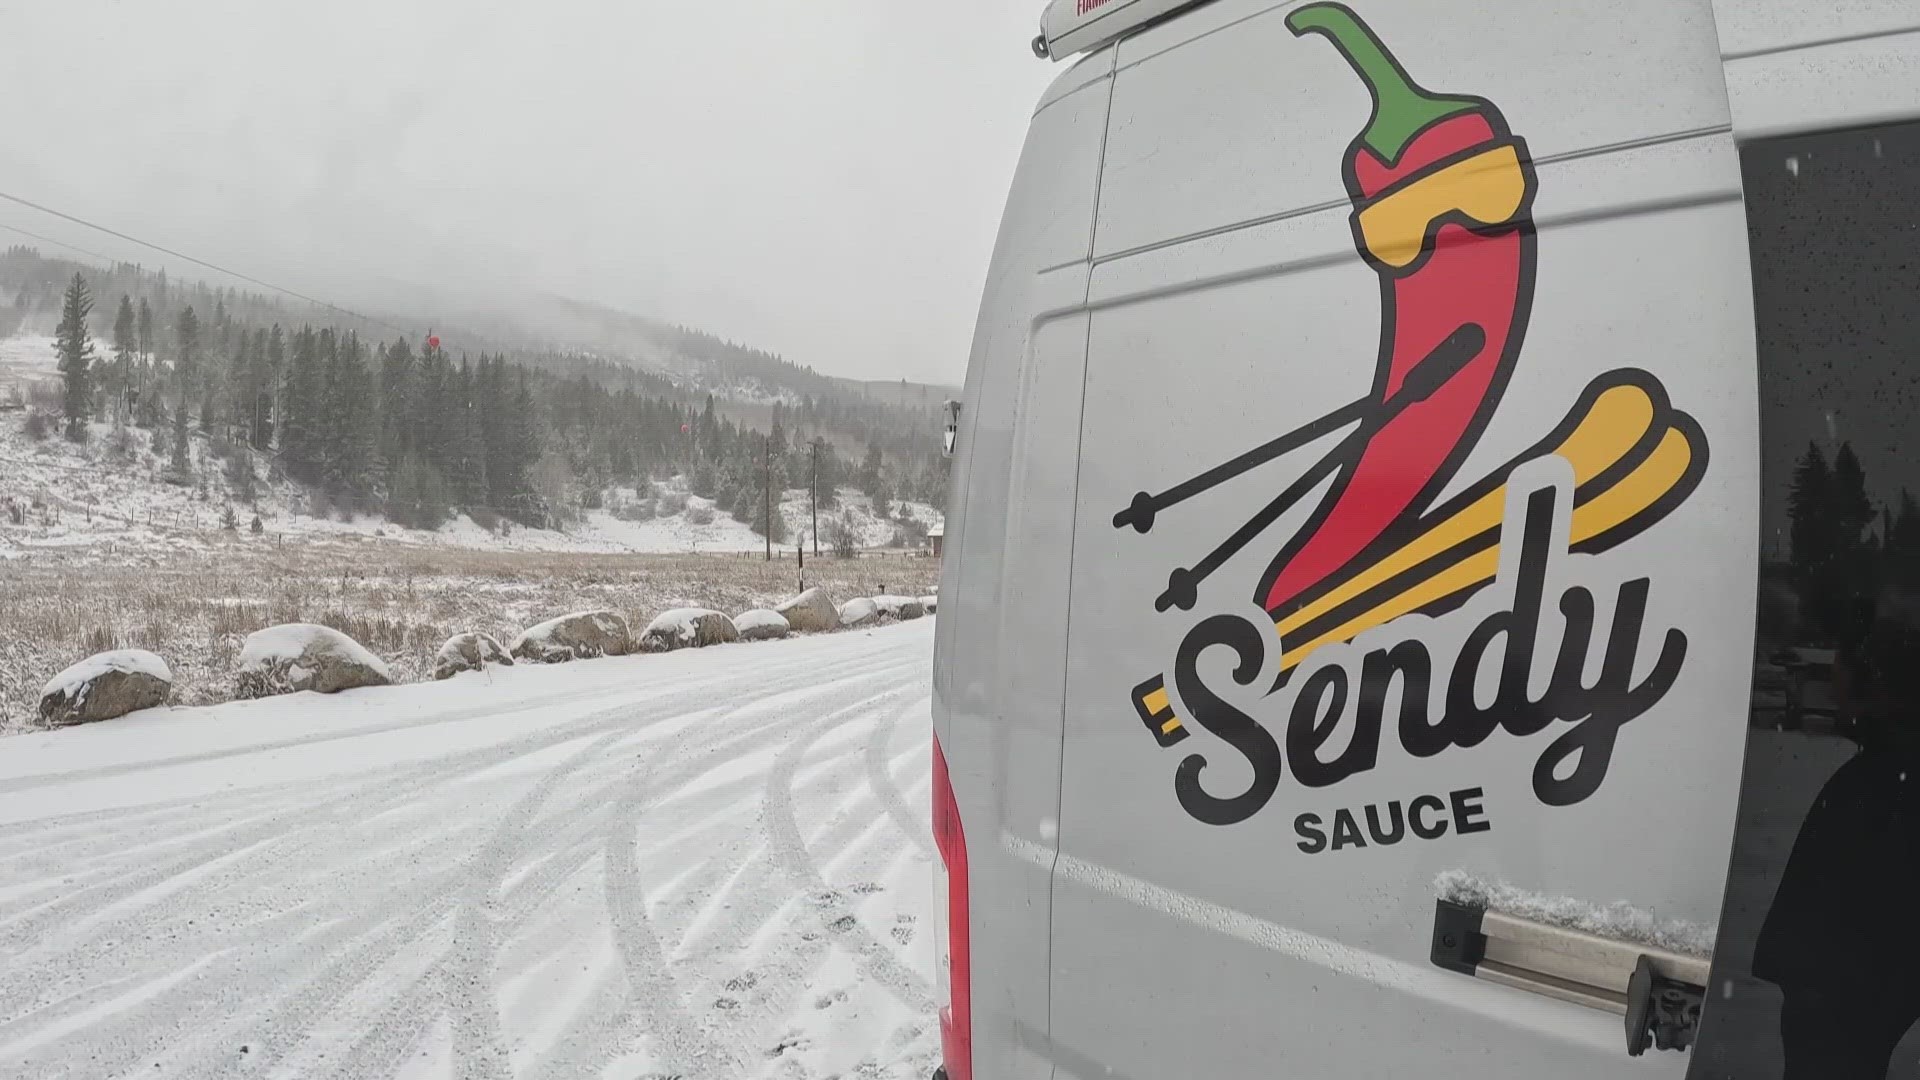 Friends of the Colorado Avalanche Information Center and Sendy Sauce in Eagle have a new Spicy Moderate sauce that includes Avalanche information and safety tips